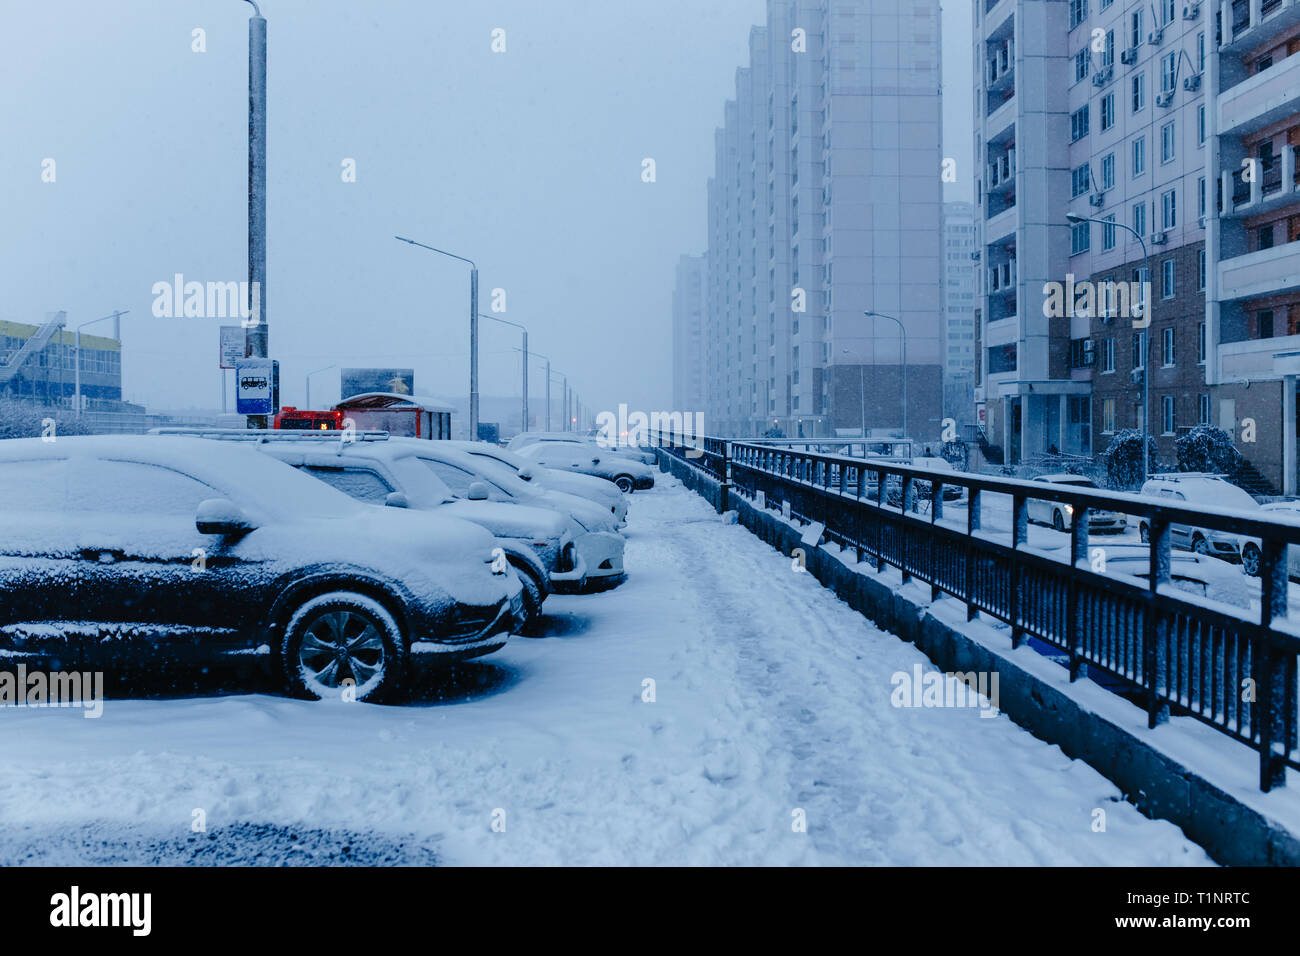 Winter snow city street scene. Snow covered cars on winter street in Russia. Stock Photo